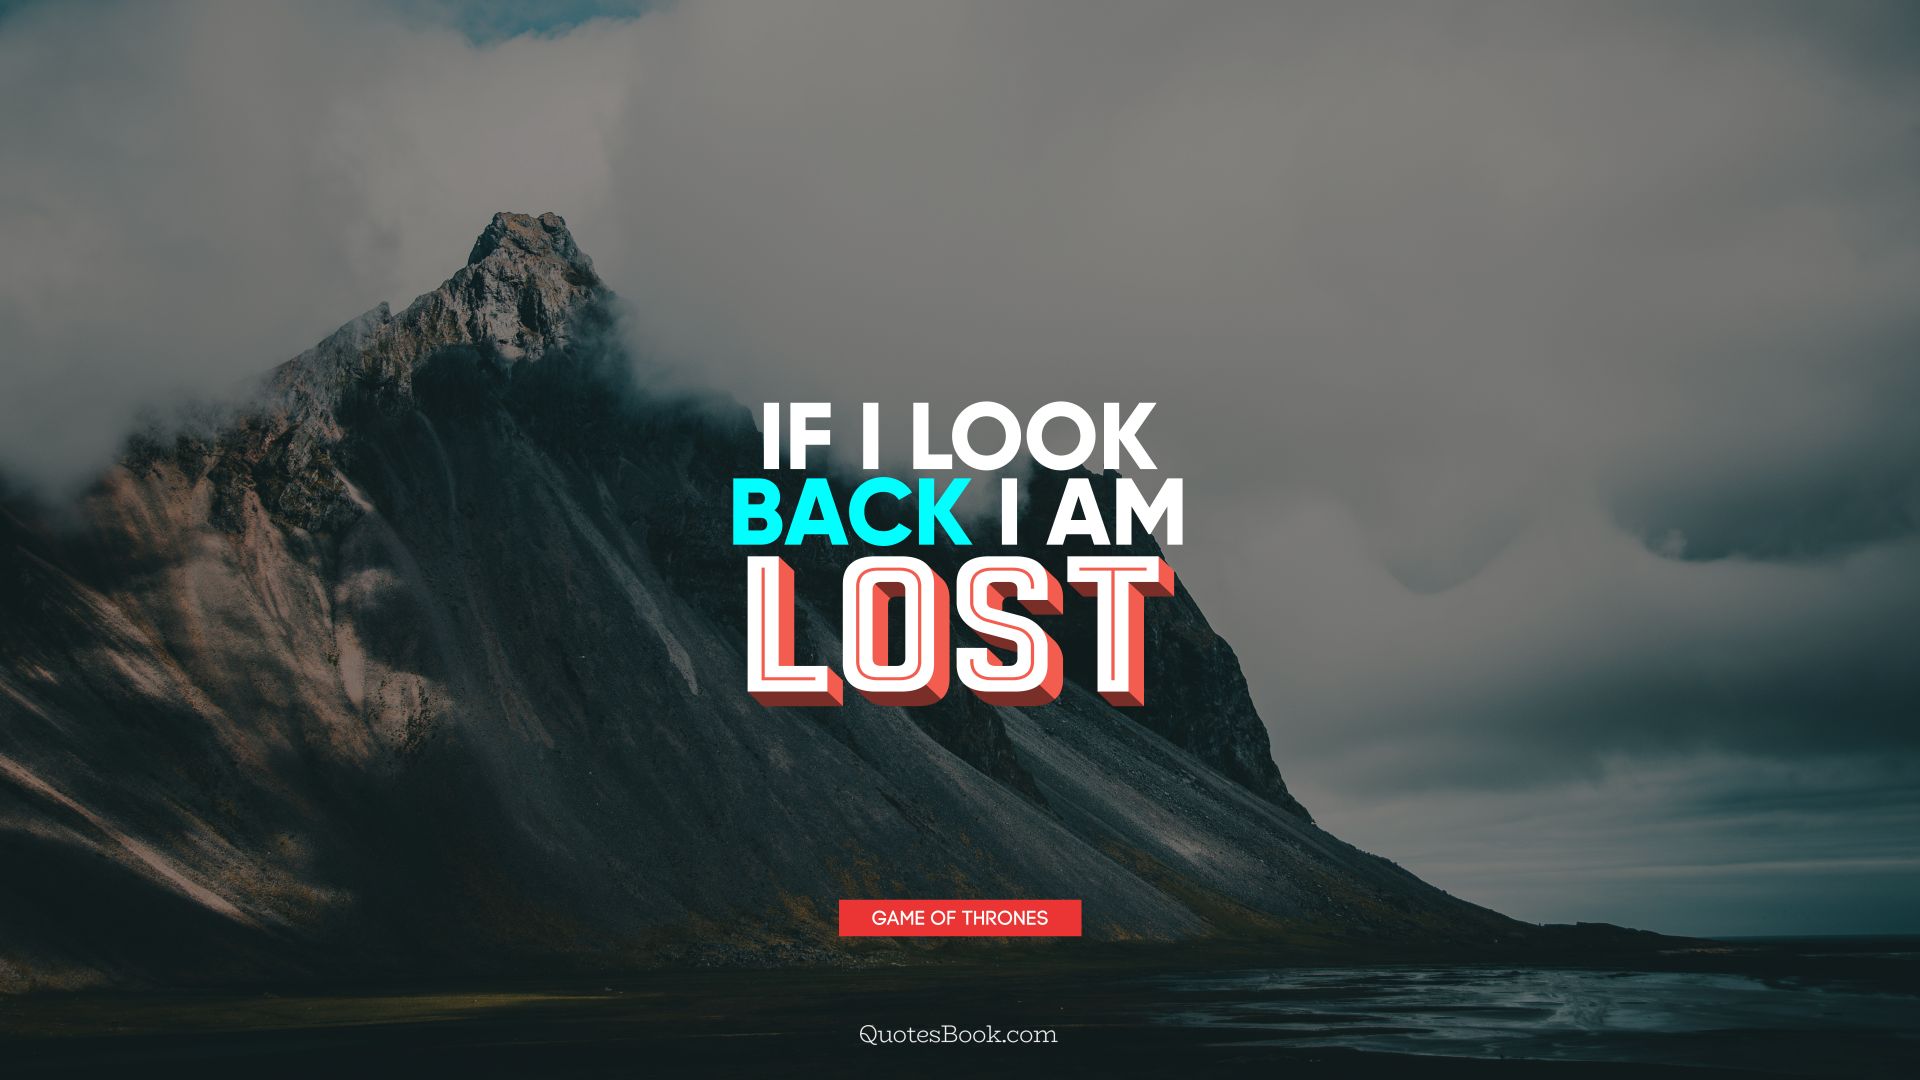 If I look back I am lost. - Quote by George R.R. Martin